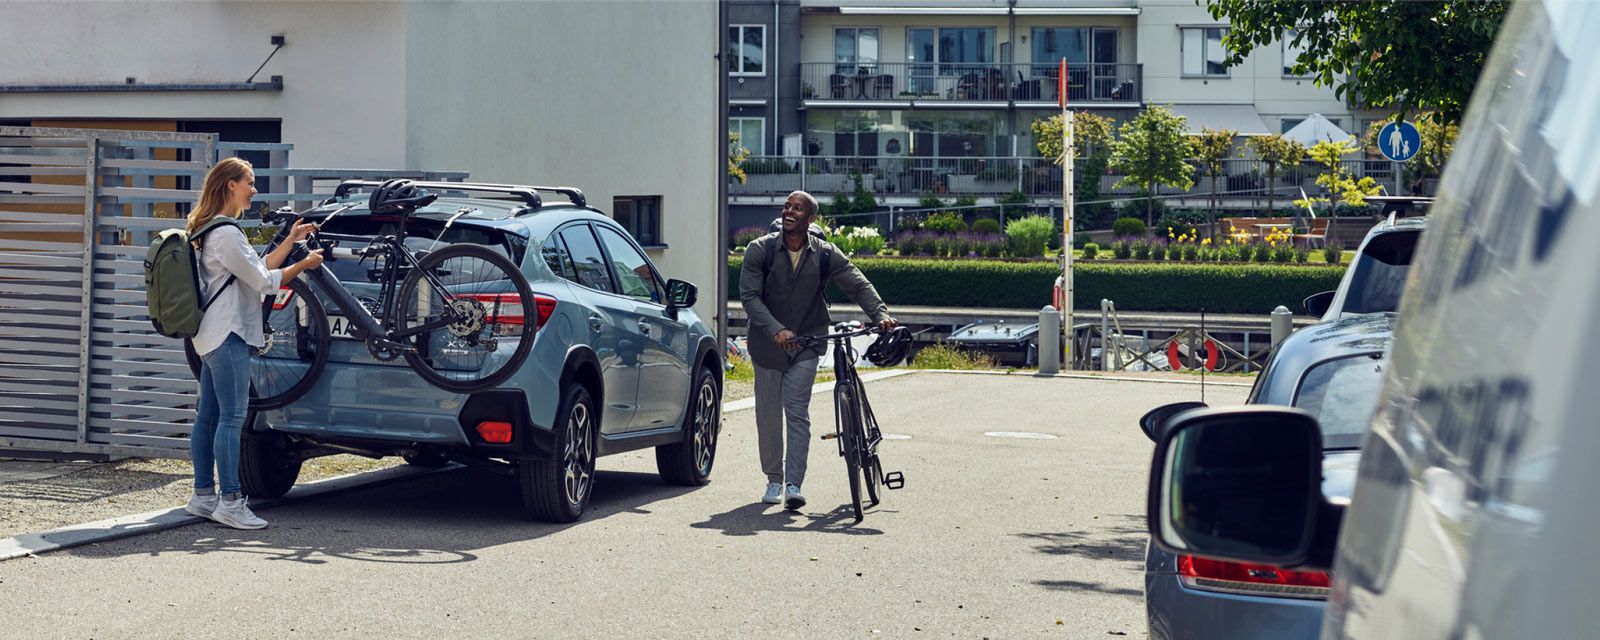 A woman unloads her bike from a Thule car mount for bike while a man with a bike walks towards her.